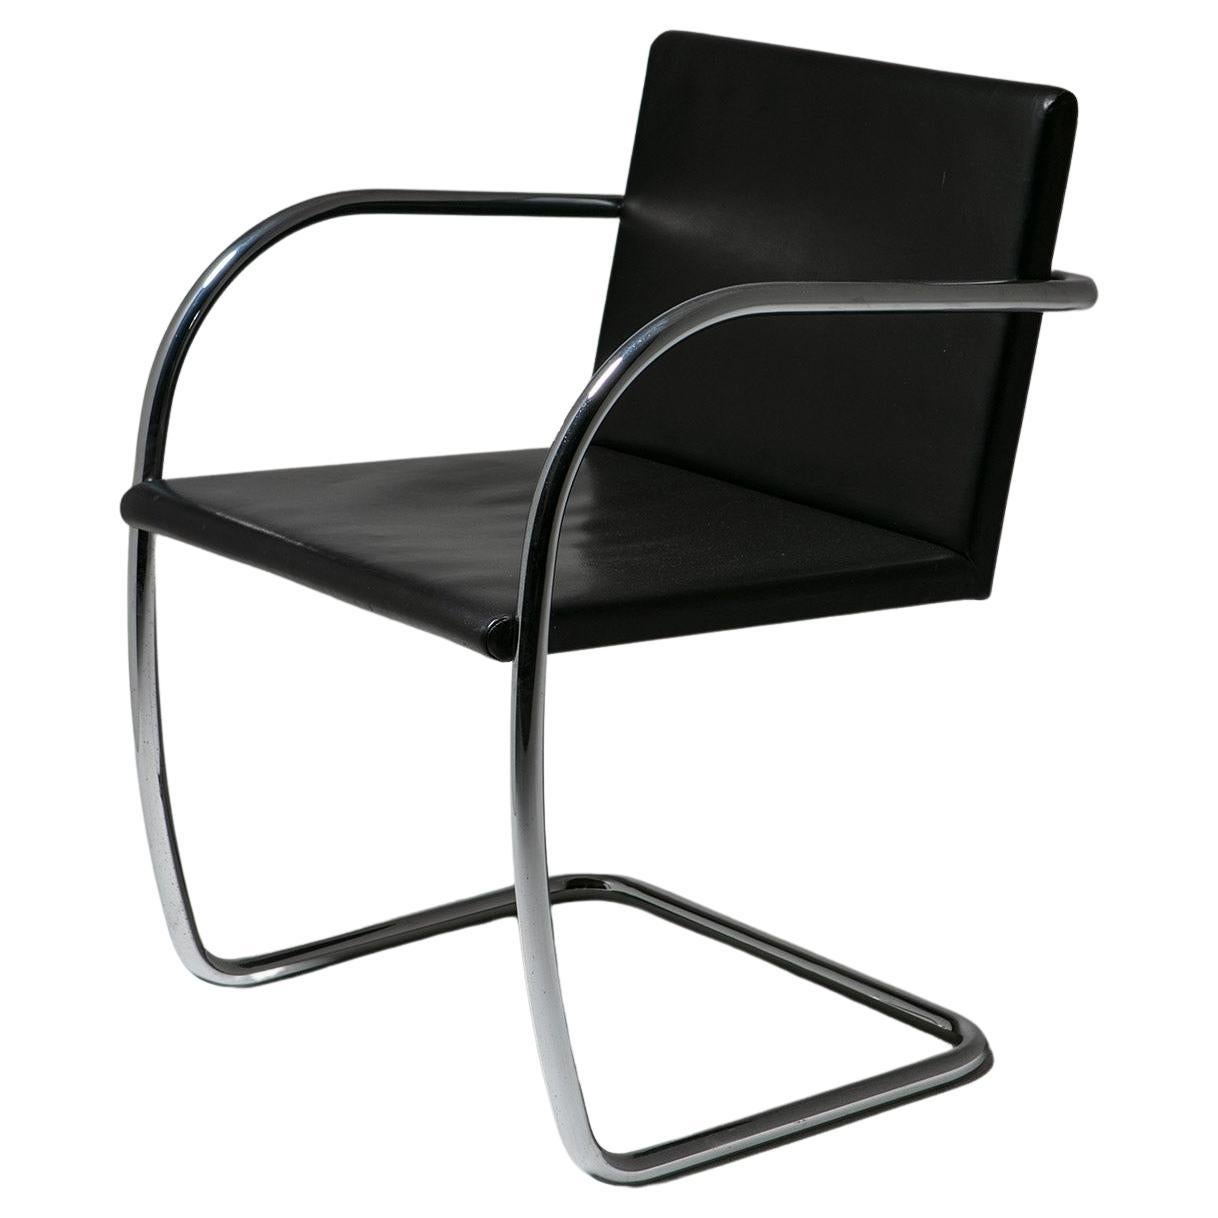 Model 245 Chrome and Leather Armchair by Mies van der Rohe for Knoll, 1960s